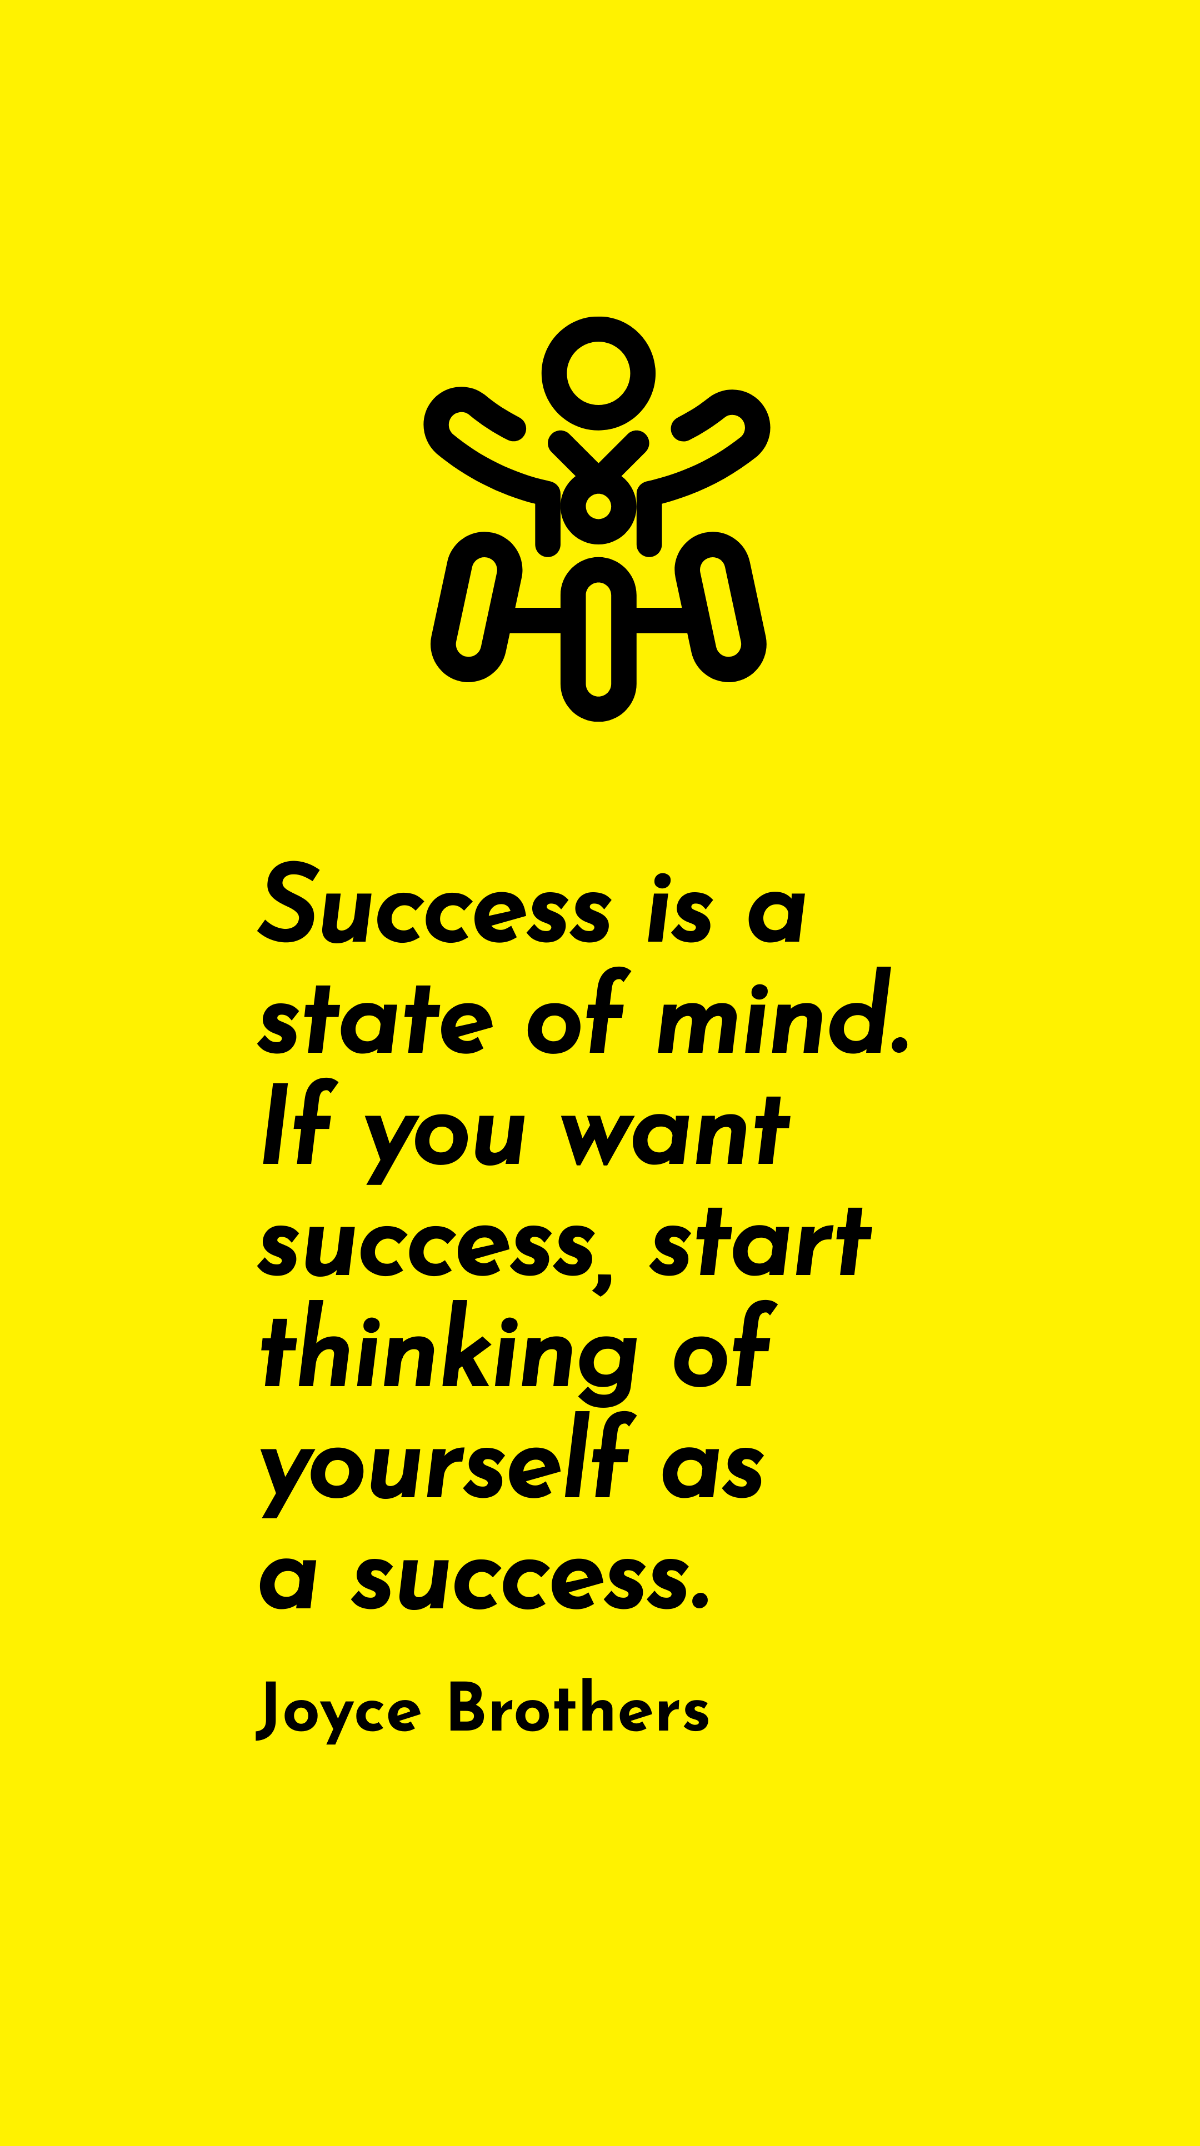 Joyce Brothers - Success is a state of mind. If you want success, start thinking of yourself as a success.